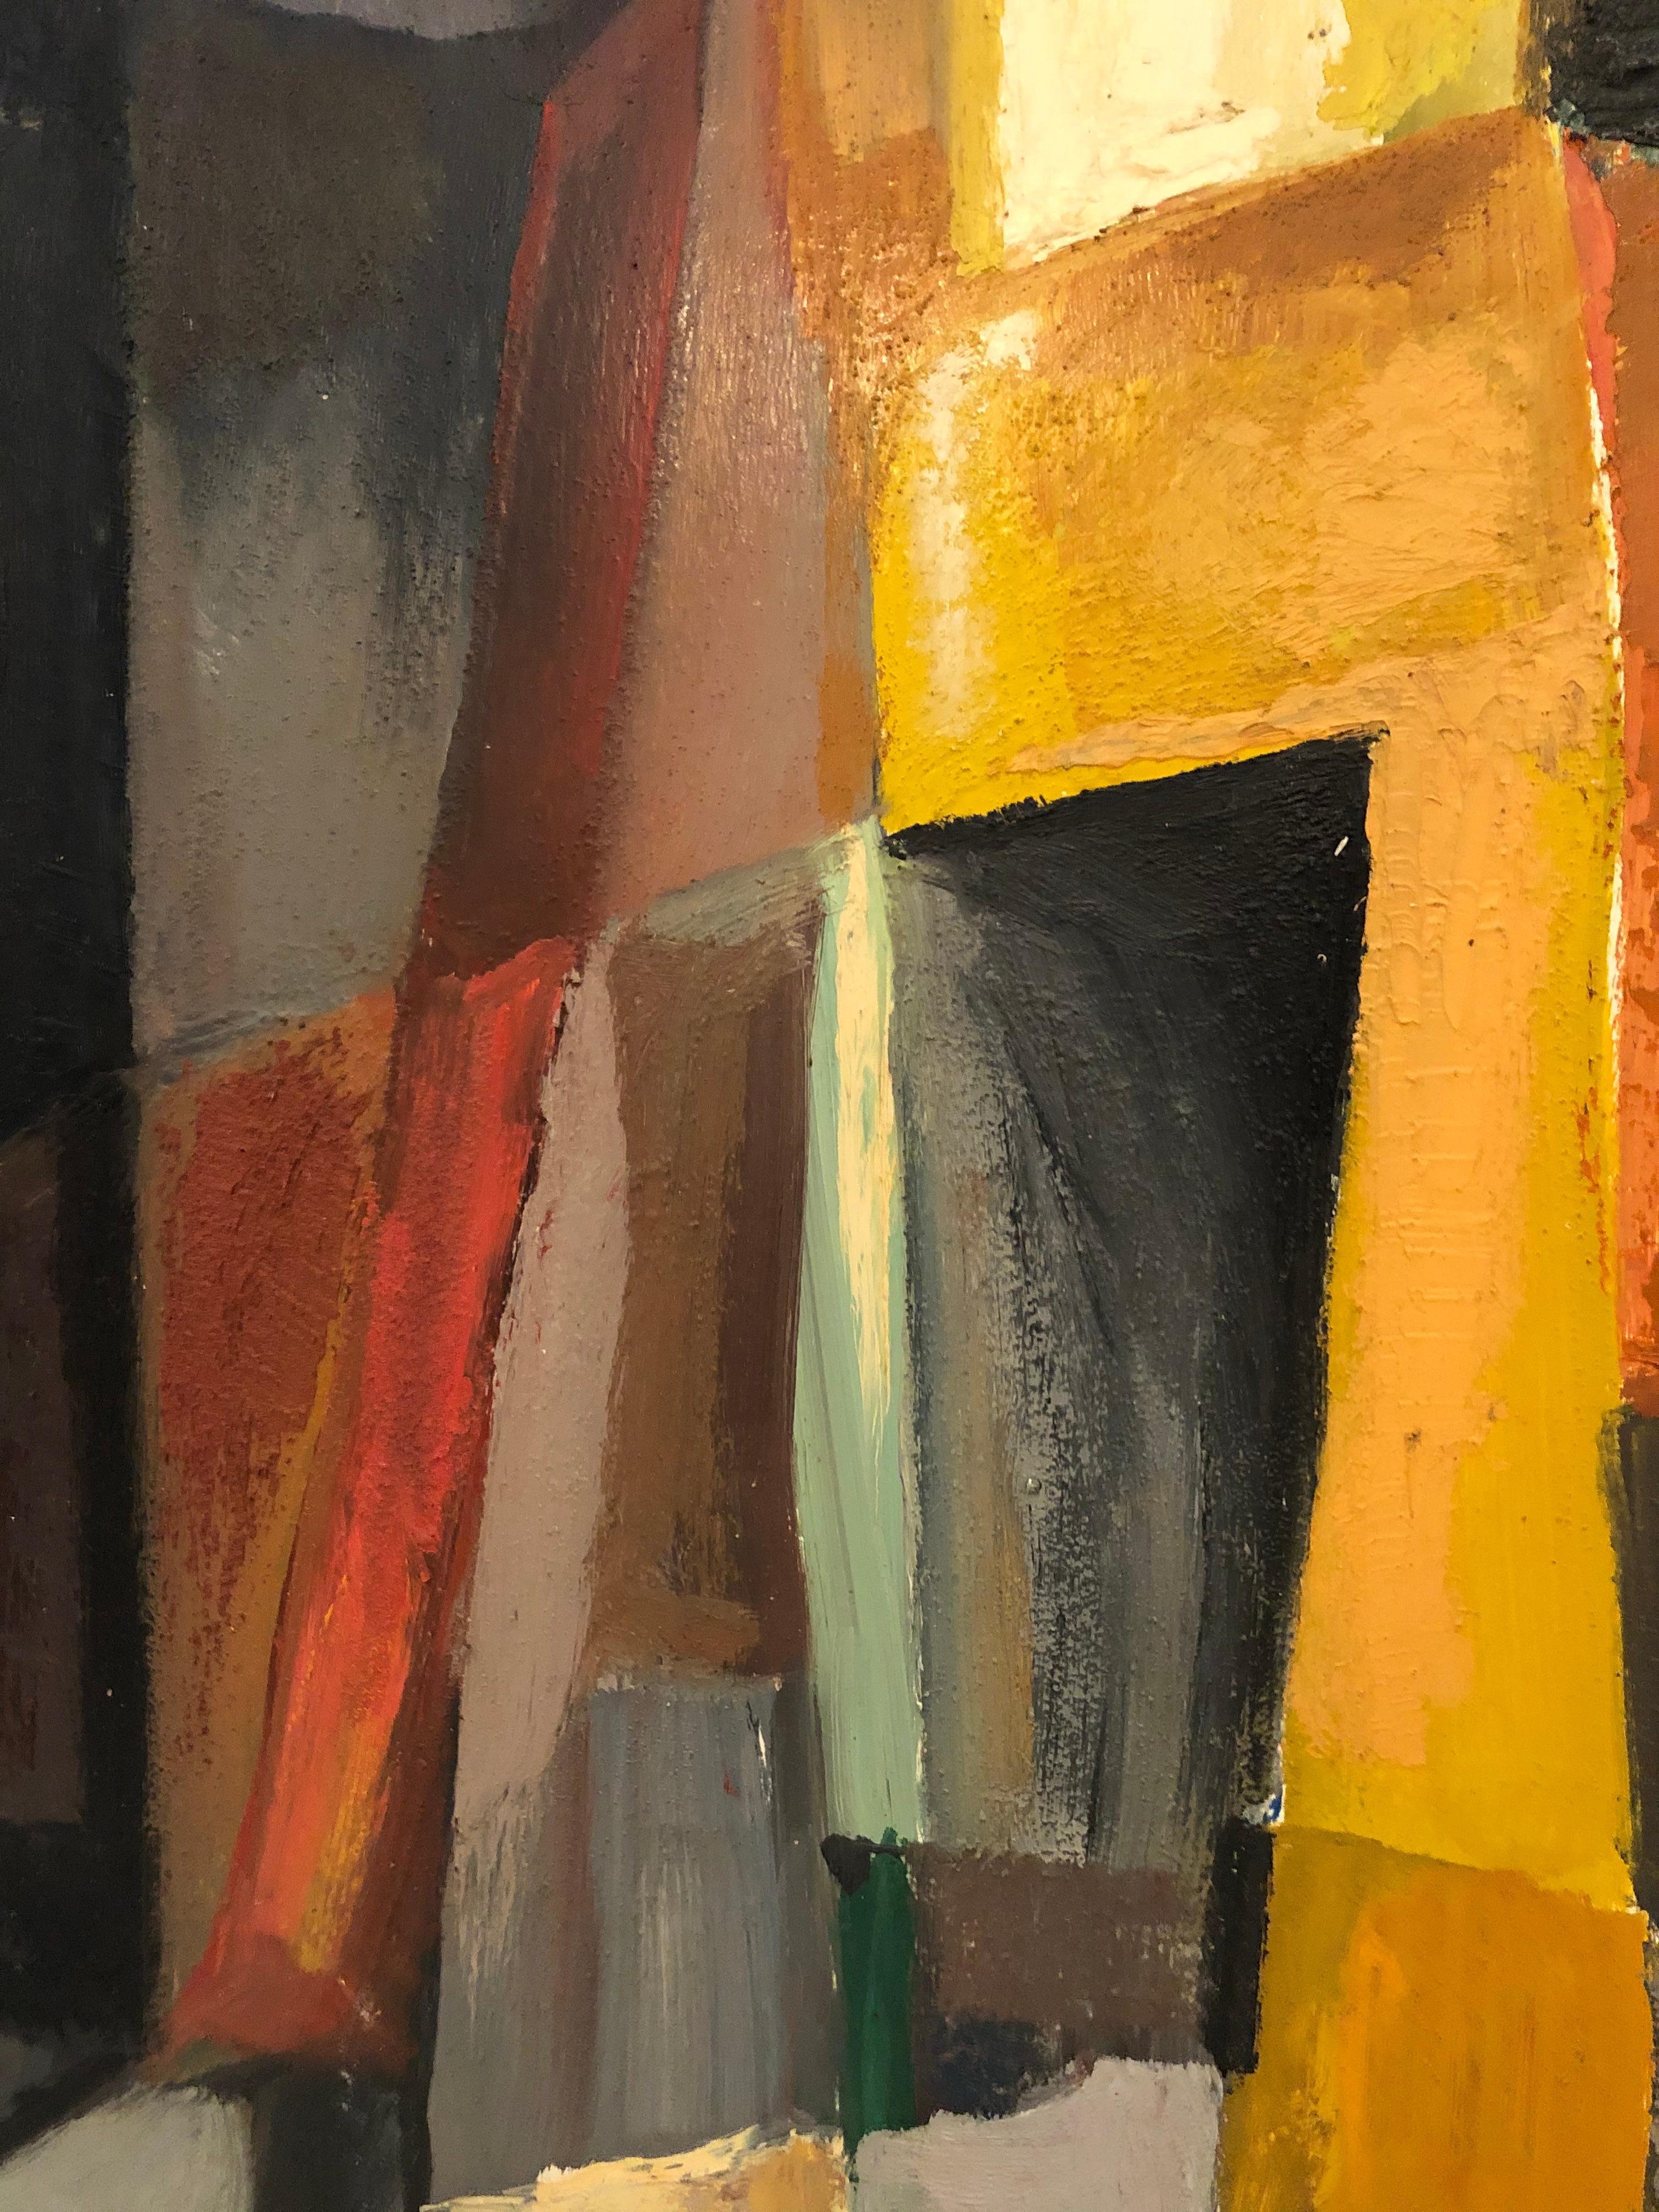 Painted Striking Cubist Abstract Painting in Orange, Yellow, Grey and Black